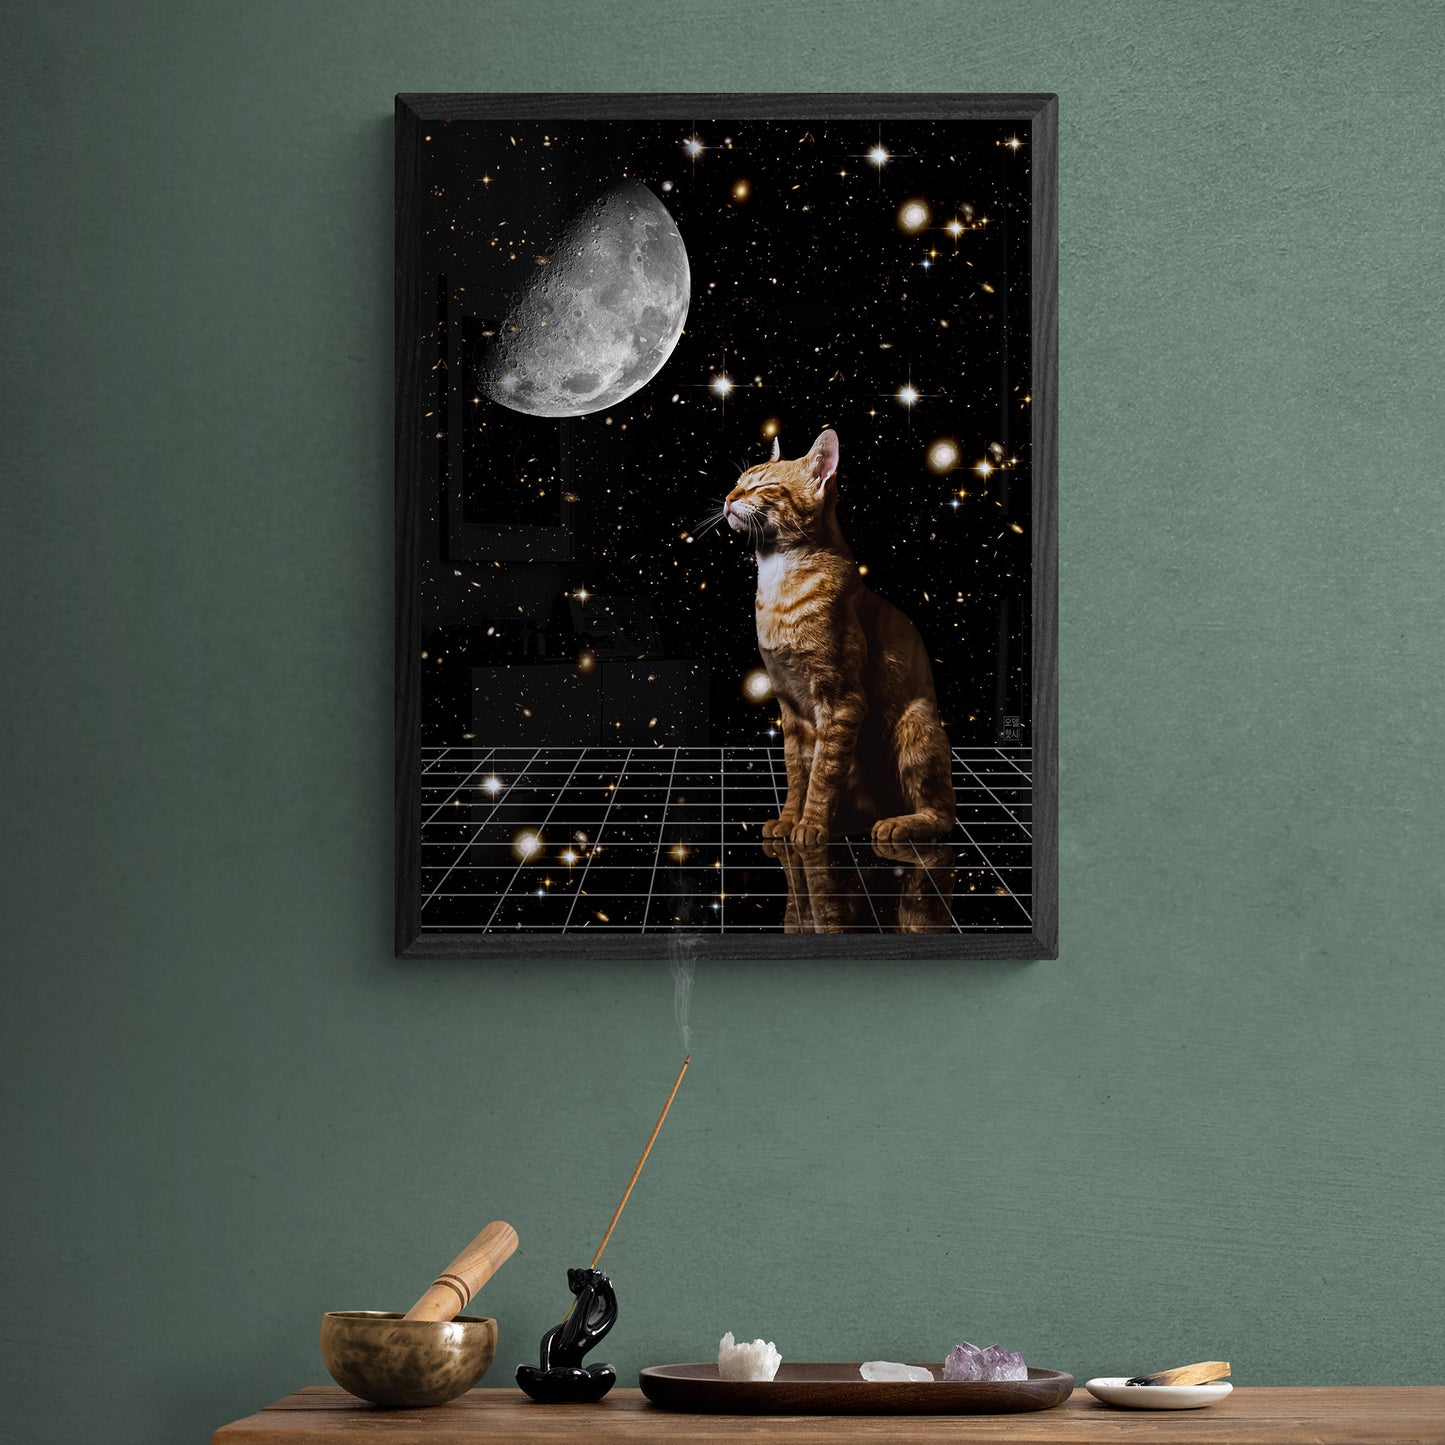 Meditation Cat 18X24 Inch Print for surreal and collage art fans, great for unique home decor, cat fans and moon lovers